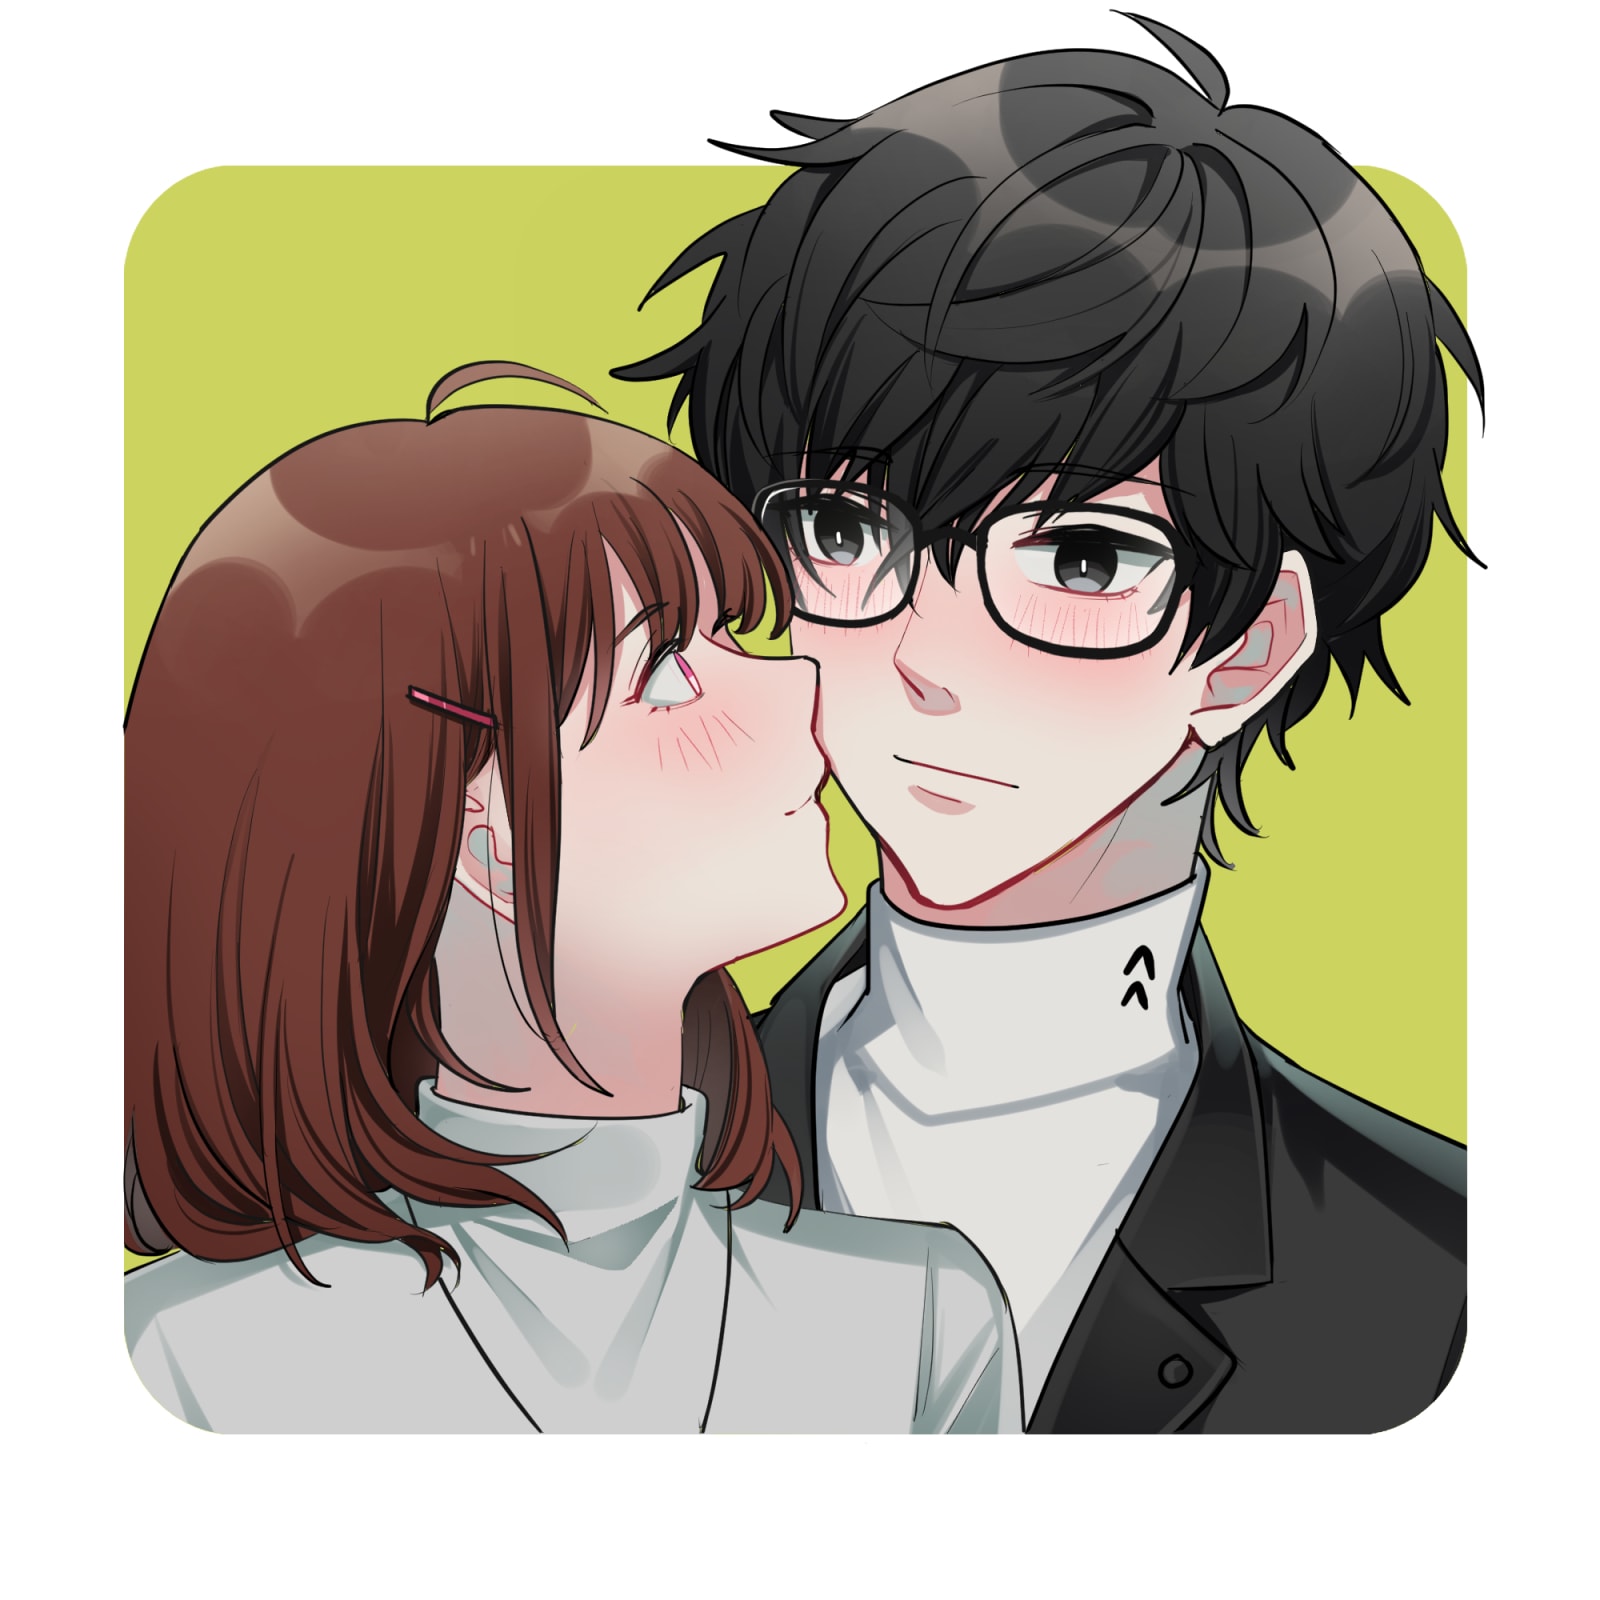 Draw a sweet anime couple illustration of your characters by Ridd08 | Fiverr